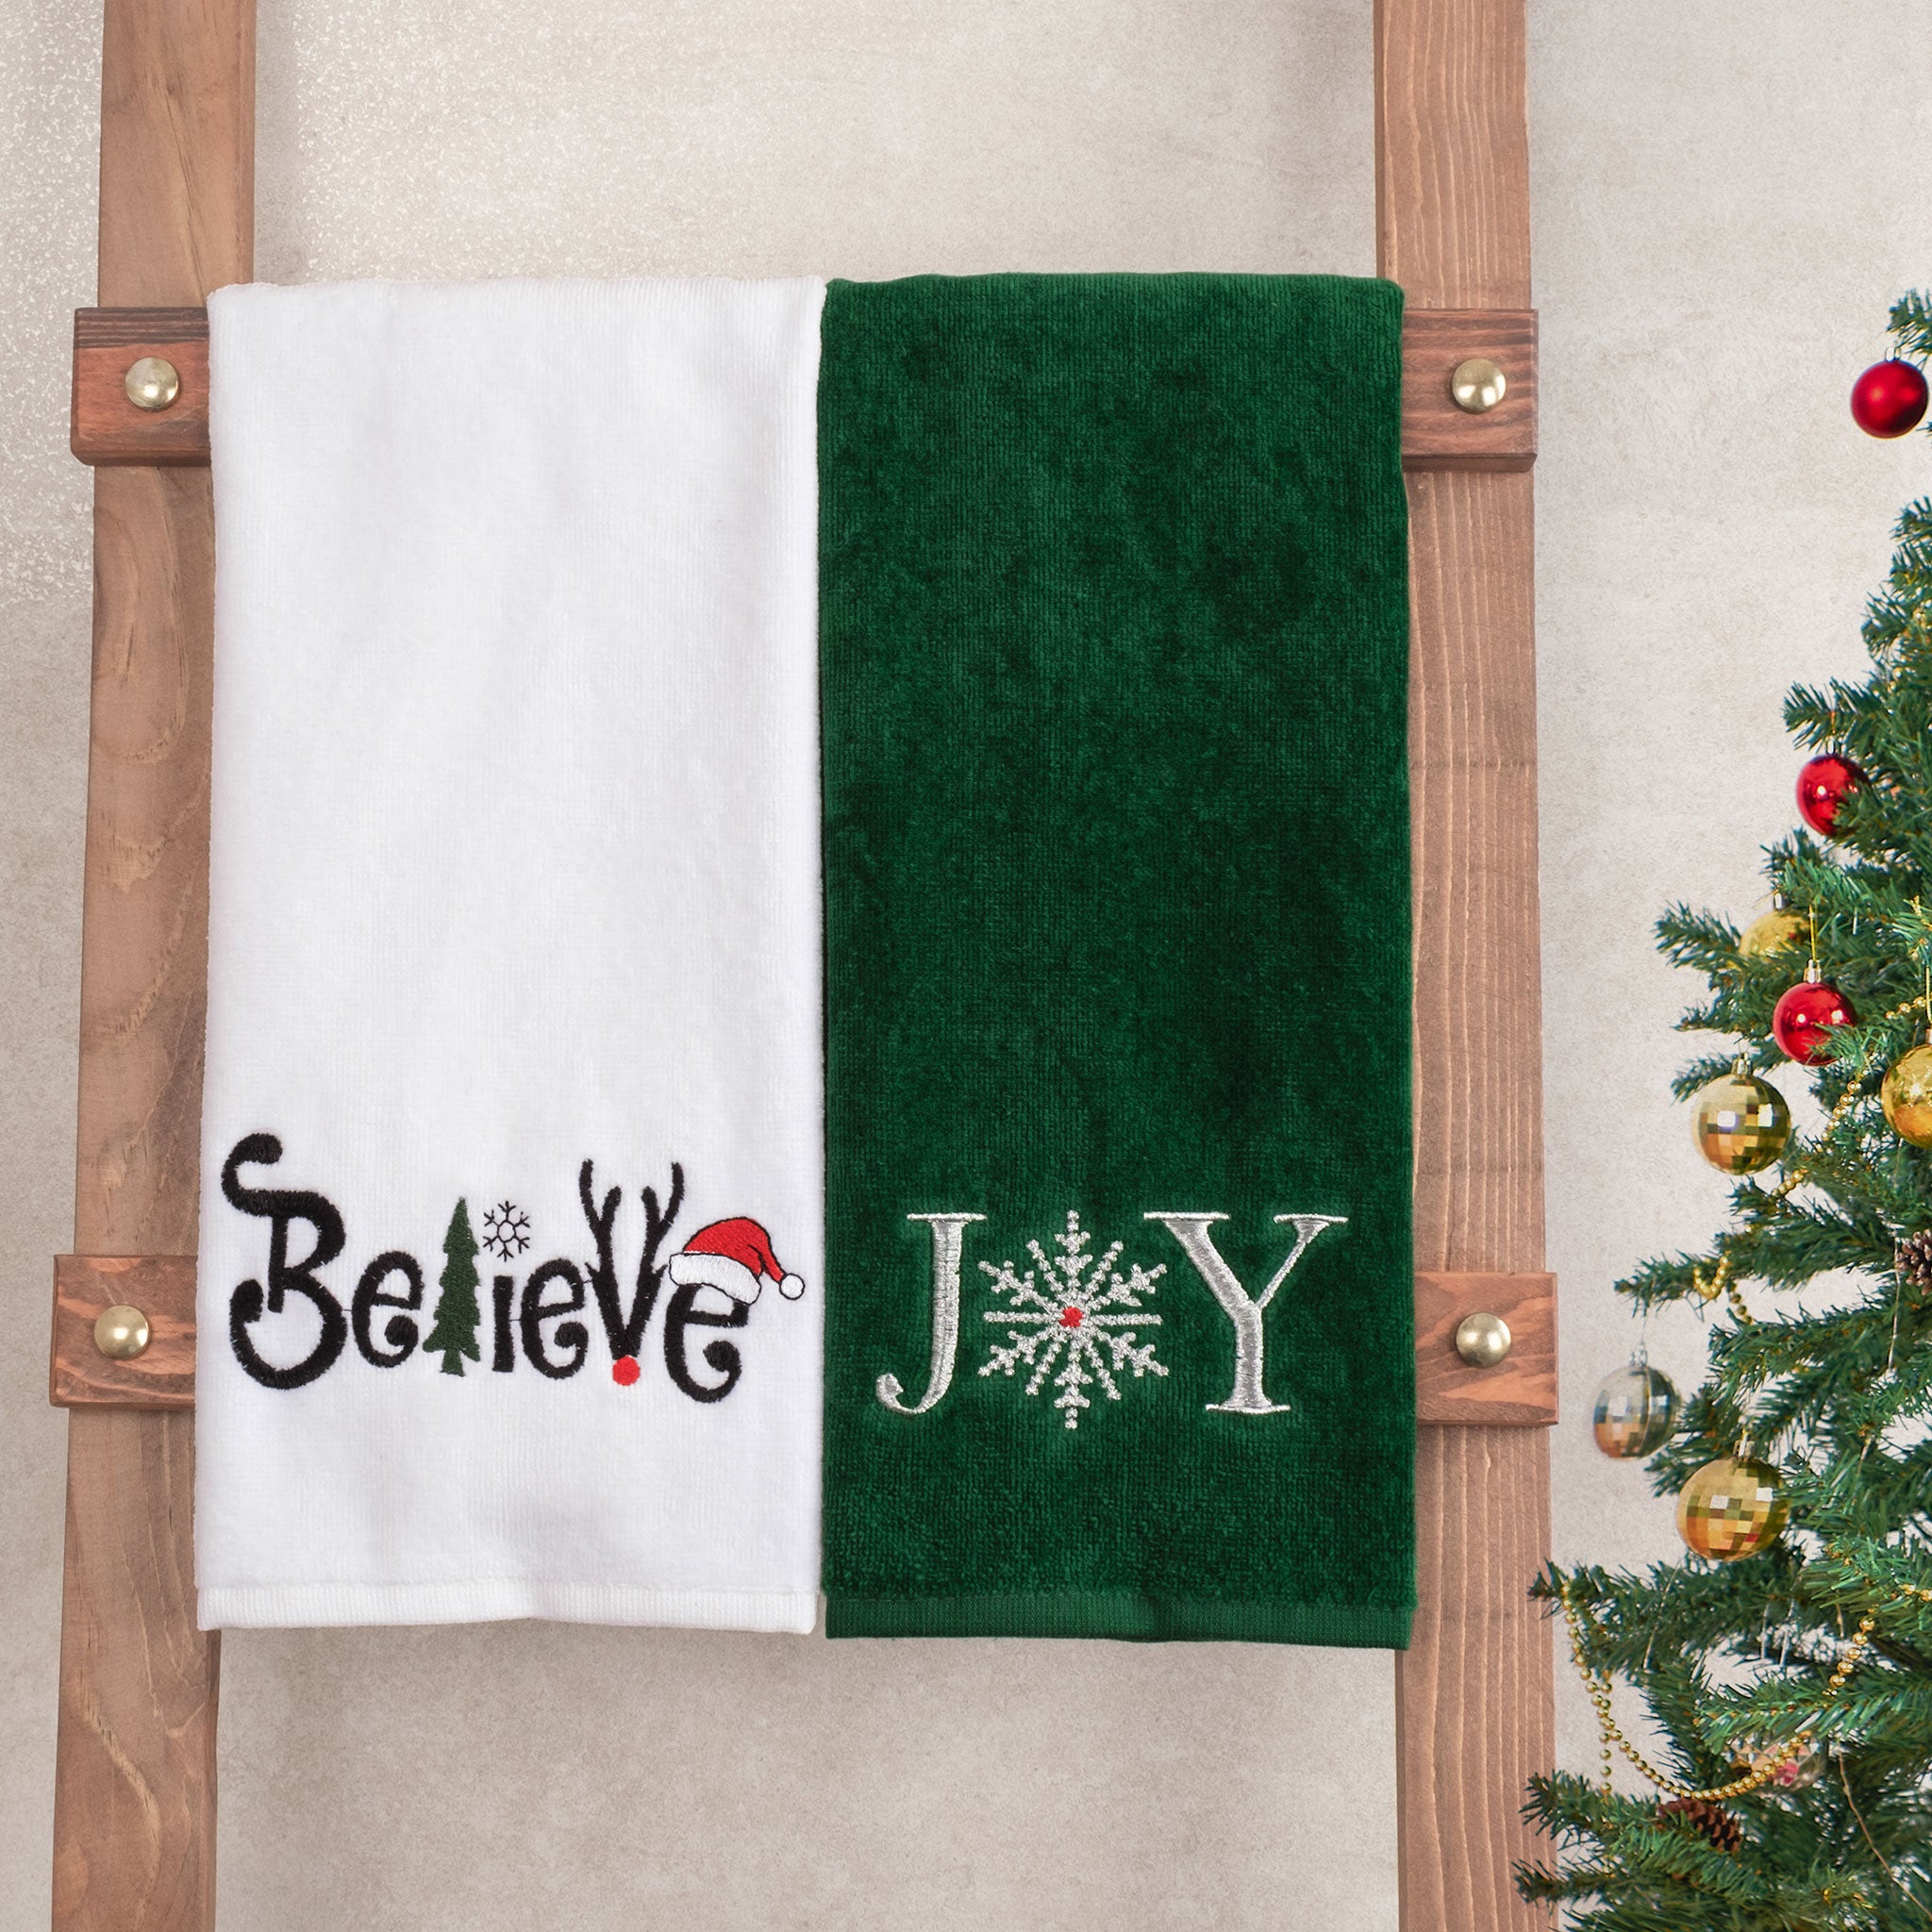 American Soft Linen - Christmas Towels 2  Packed Embroidered Towels for Decor Xmas - 60 Set Case Pack - Joy-Believe - 2